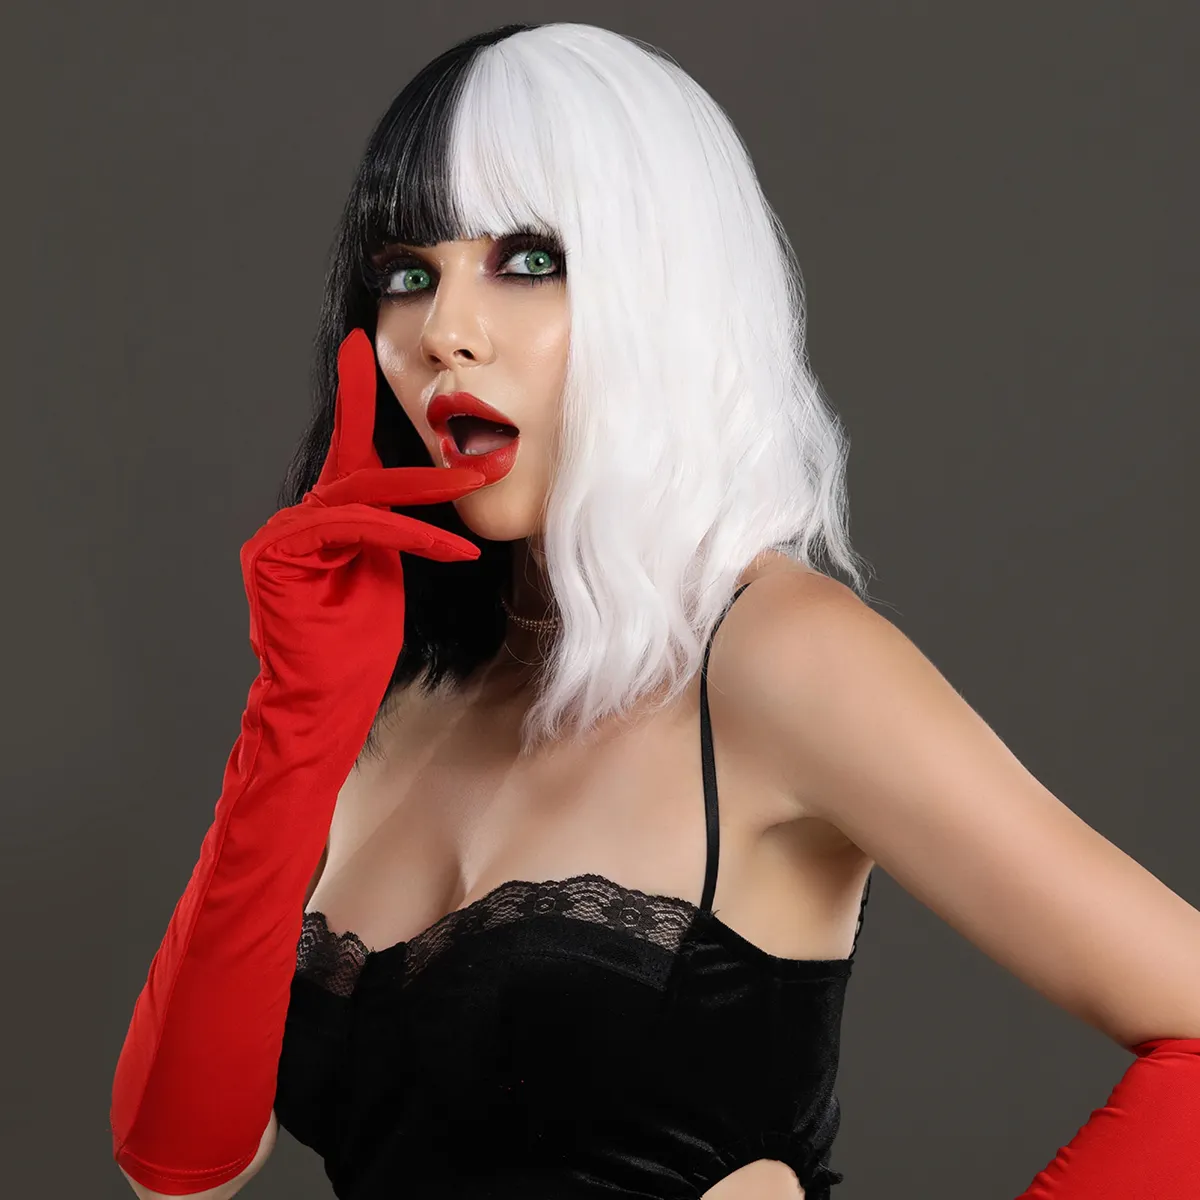 Cruella Devile Wigs Costume Halloween Cosplay Wig Synthetic Short Hair Black and White Bob Wavy Wig with Bangs for Women